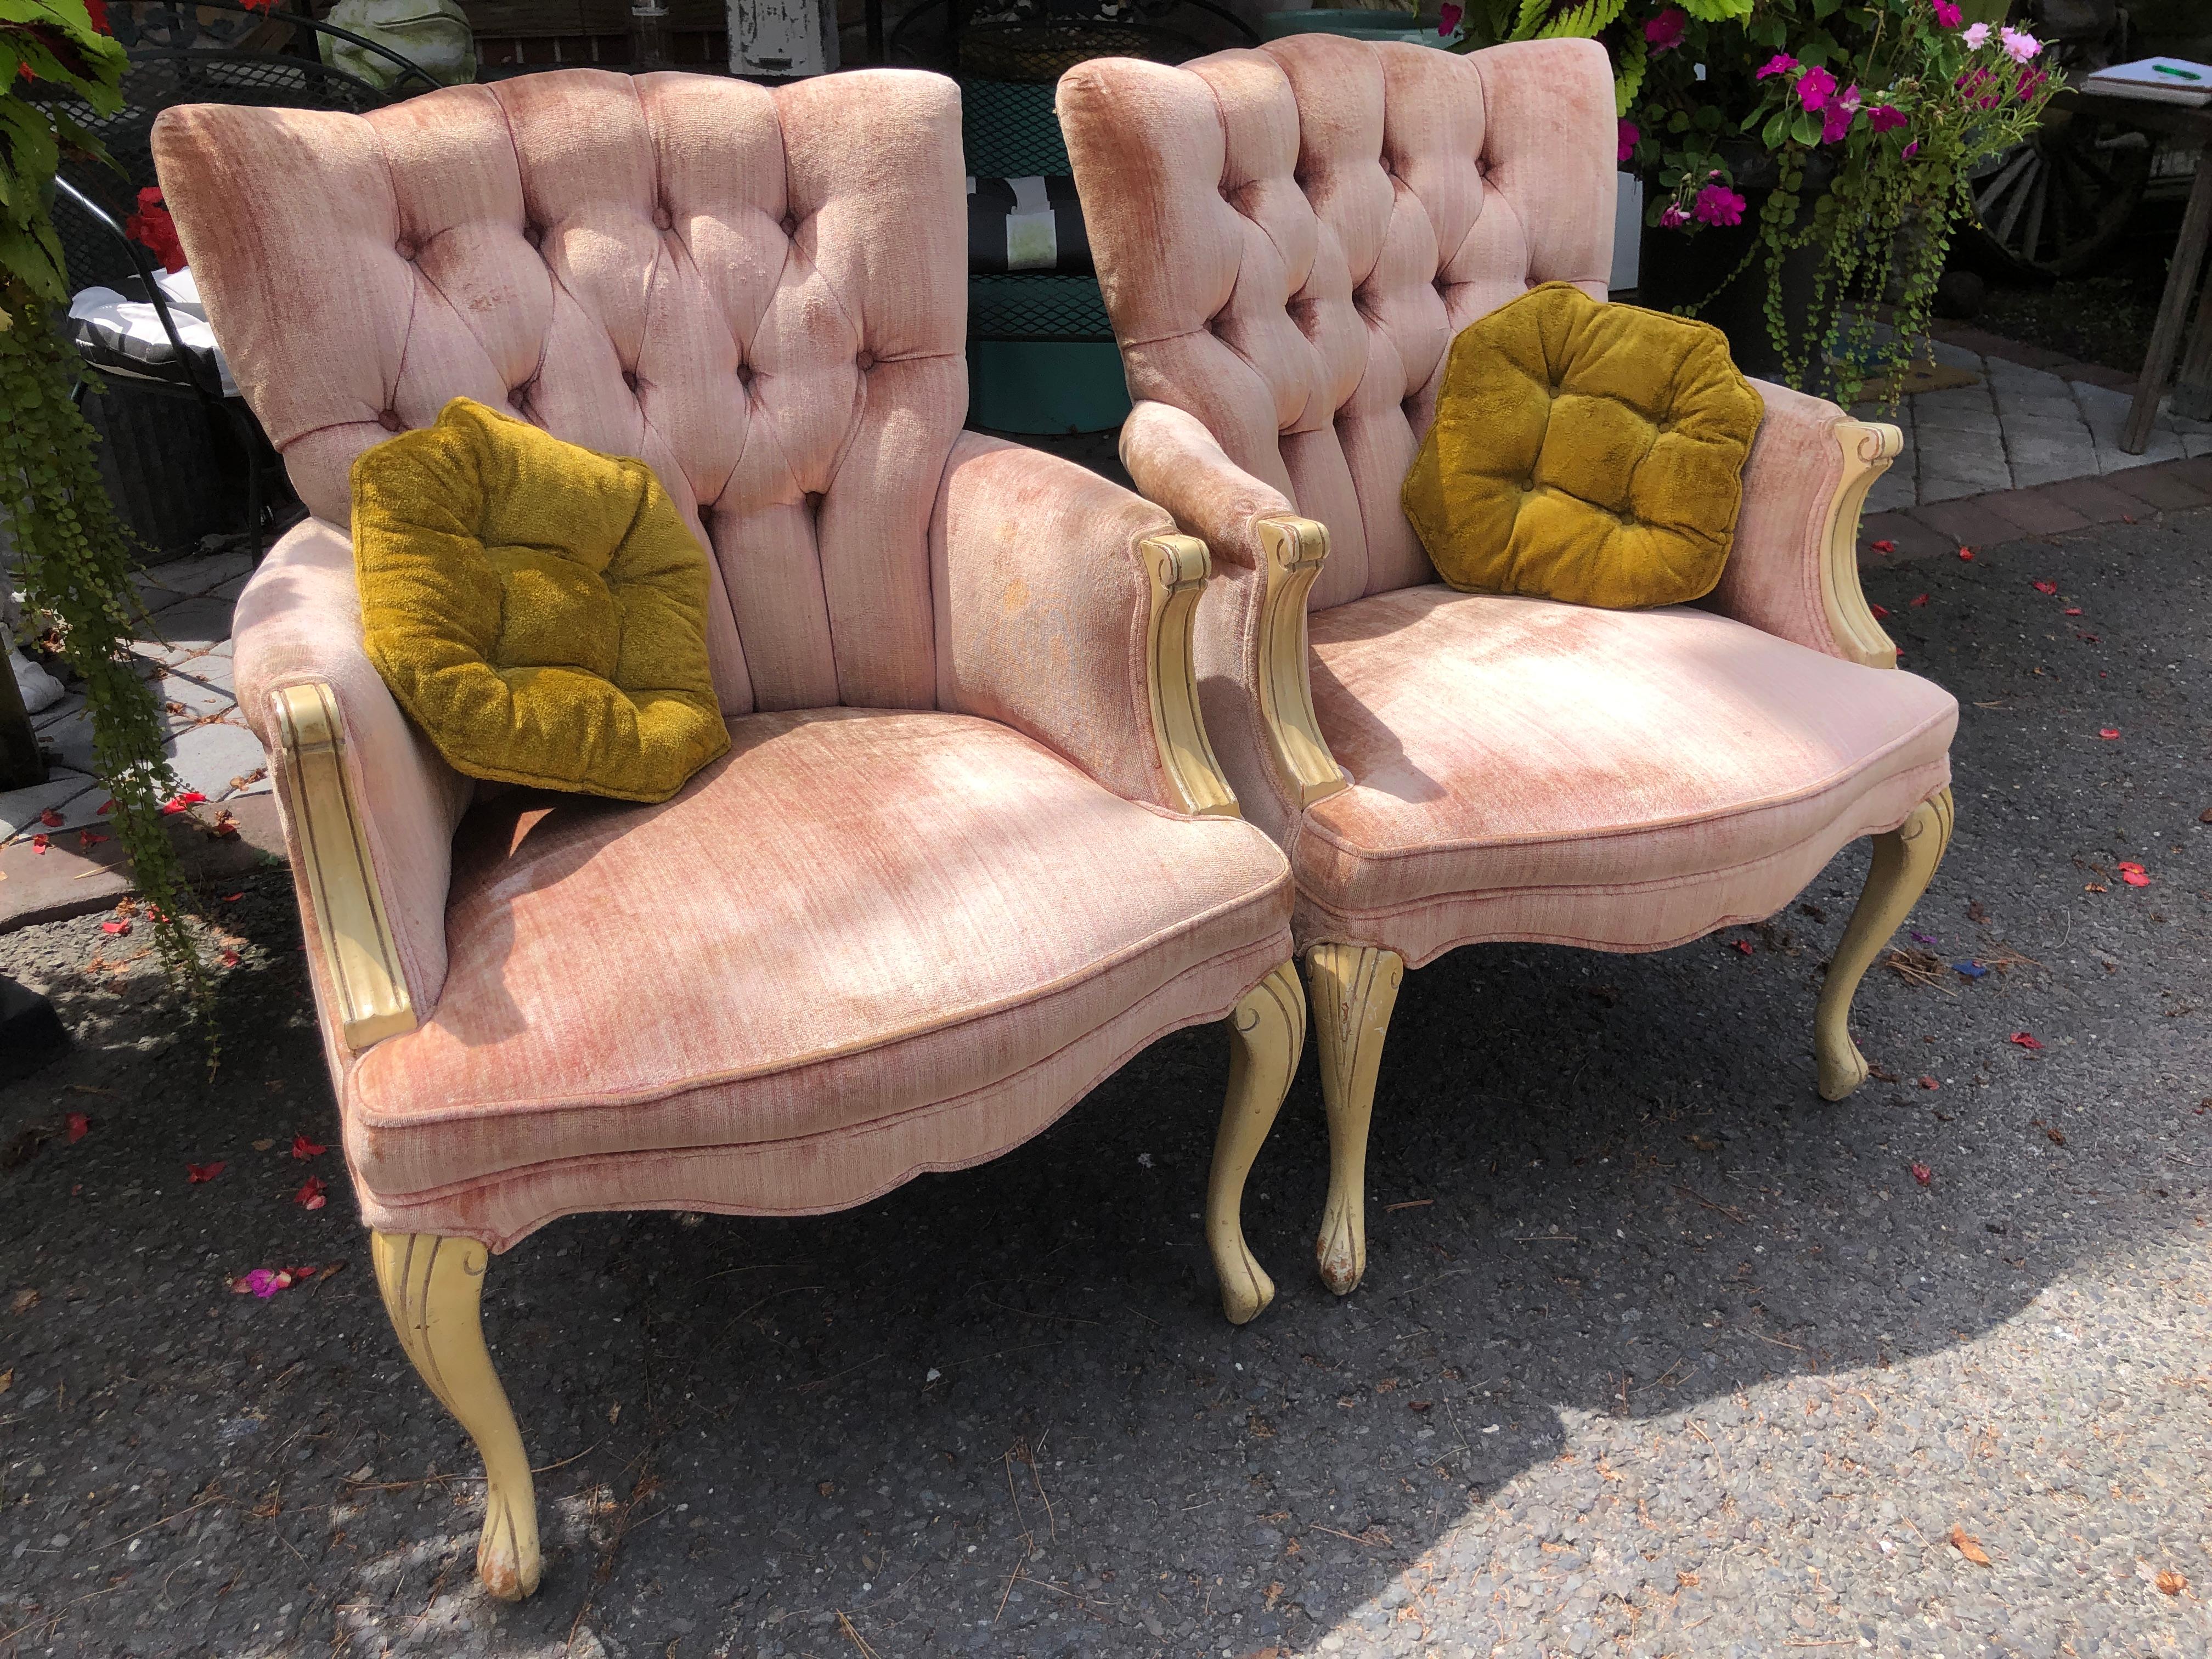 Lovely pair of French Provincial Dorothy Draper style tufted upholstered armchairs.  The legs and arm details have a distressed yellow glazed finish which gives the chair a charming vintage vibe.  These will need to be reupholstered as the original